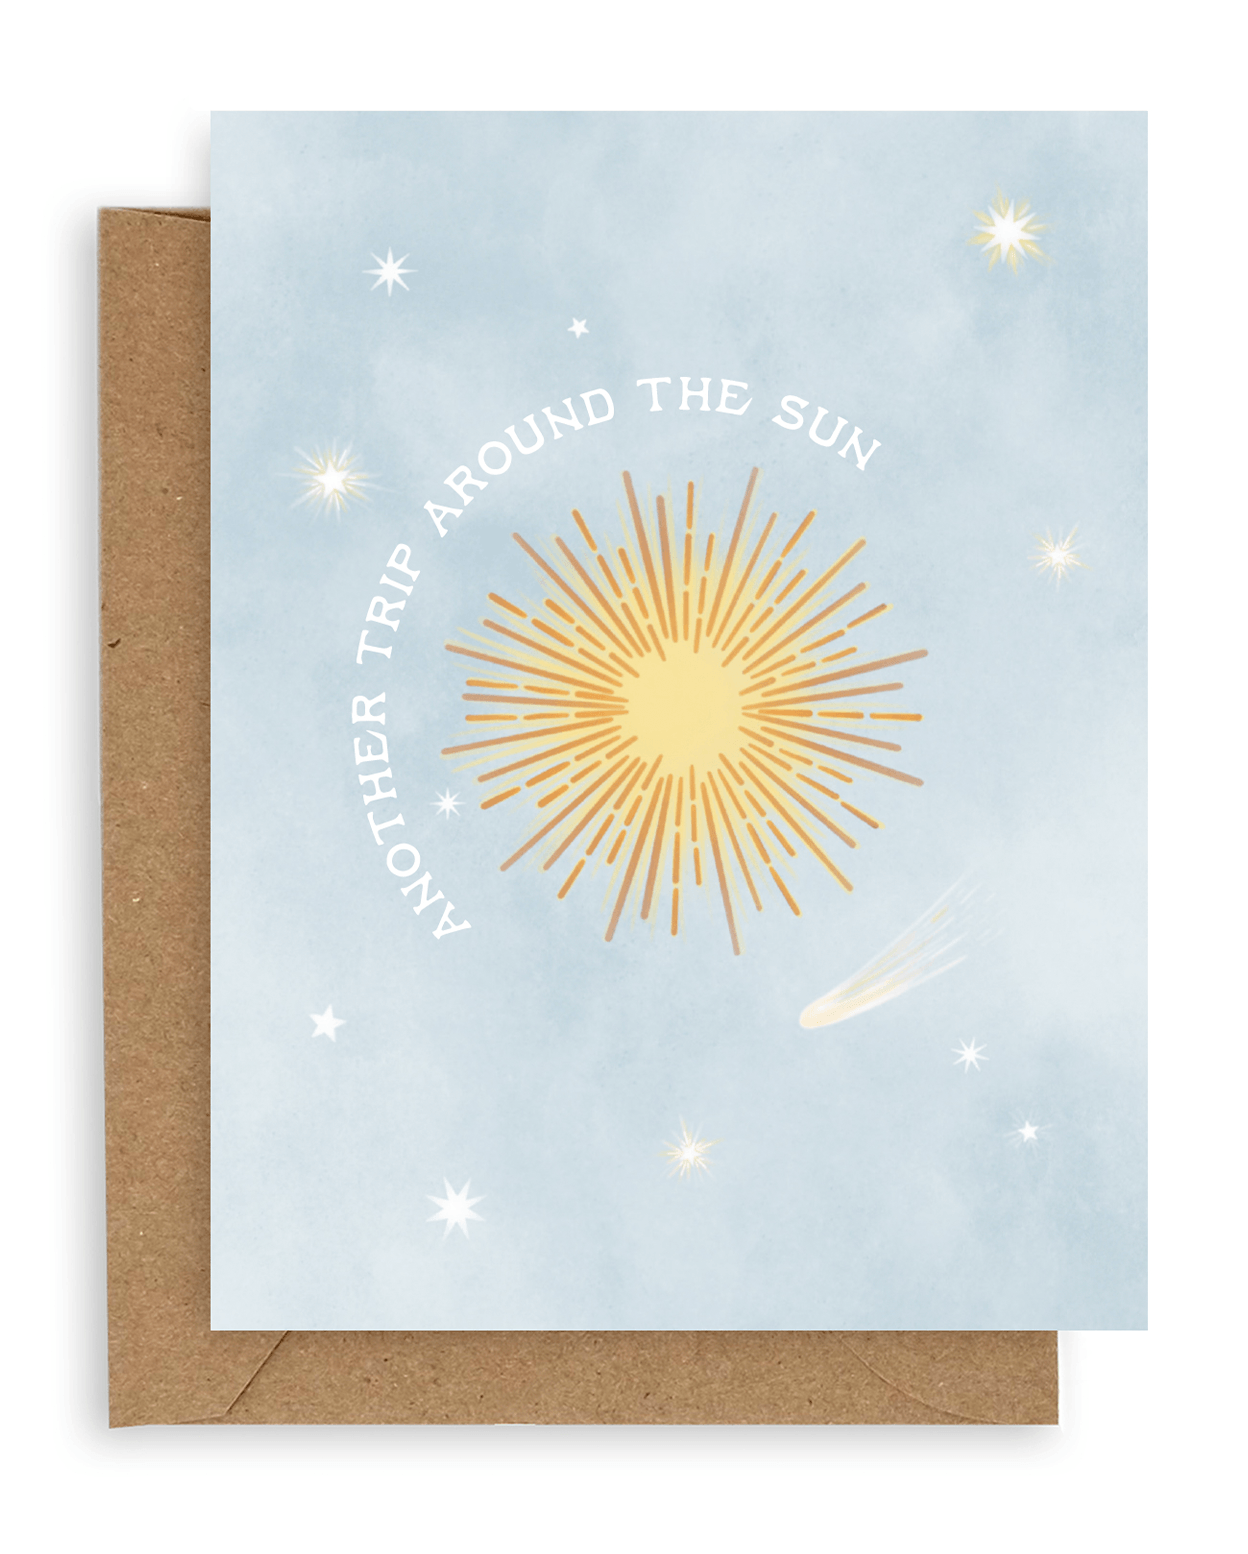 Greeting card with a pale blue background and scattered stars, a big yellow sun in the middle is circled by the words "Another Trip Around the Sun." Shown with kraft envelope.